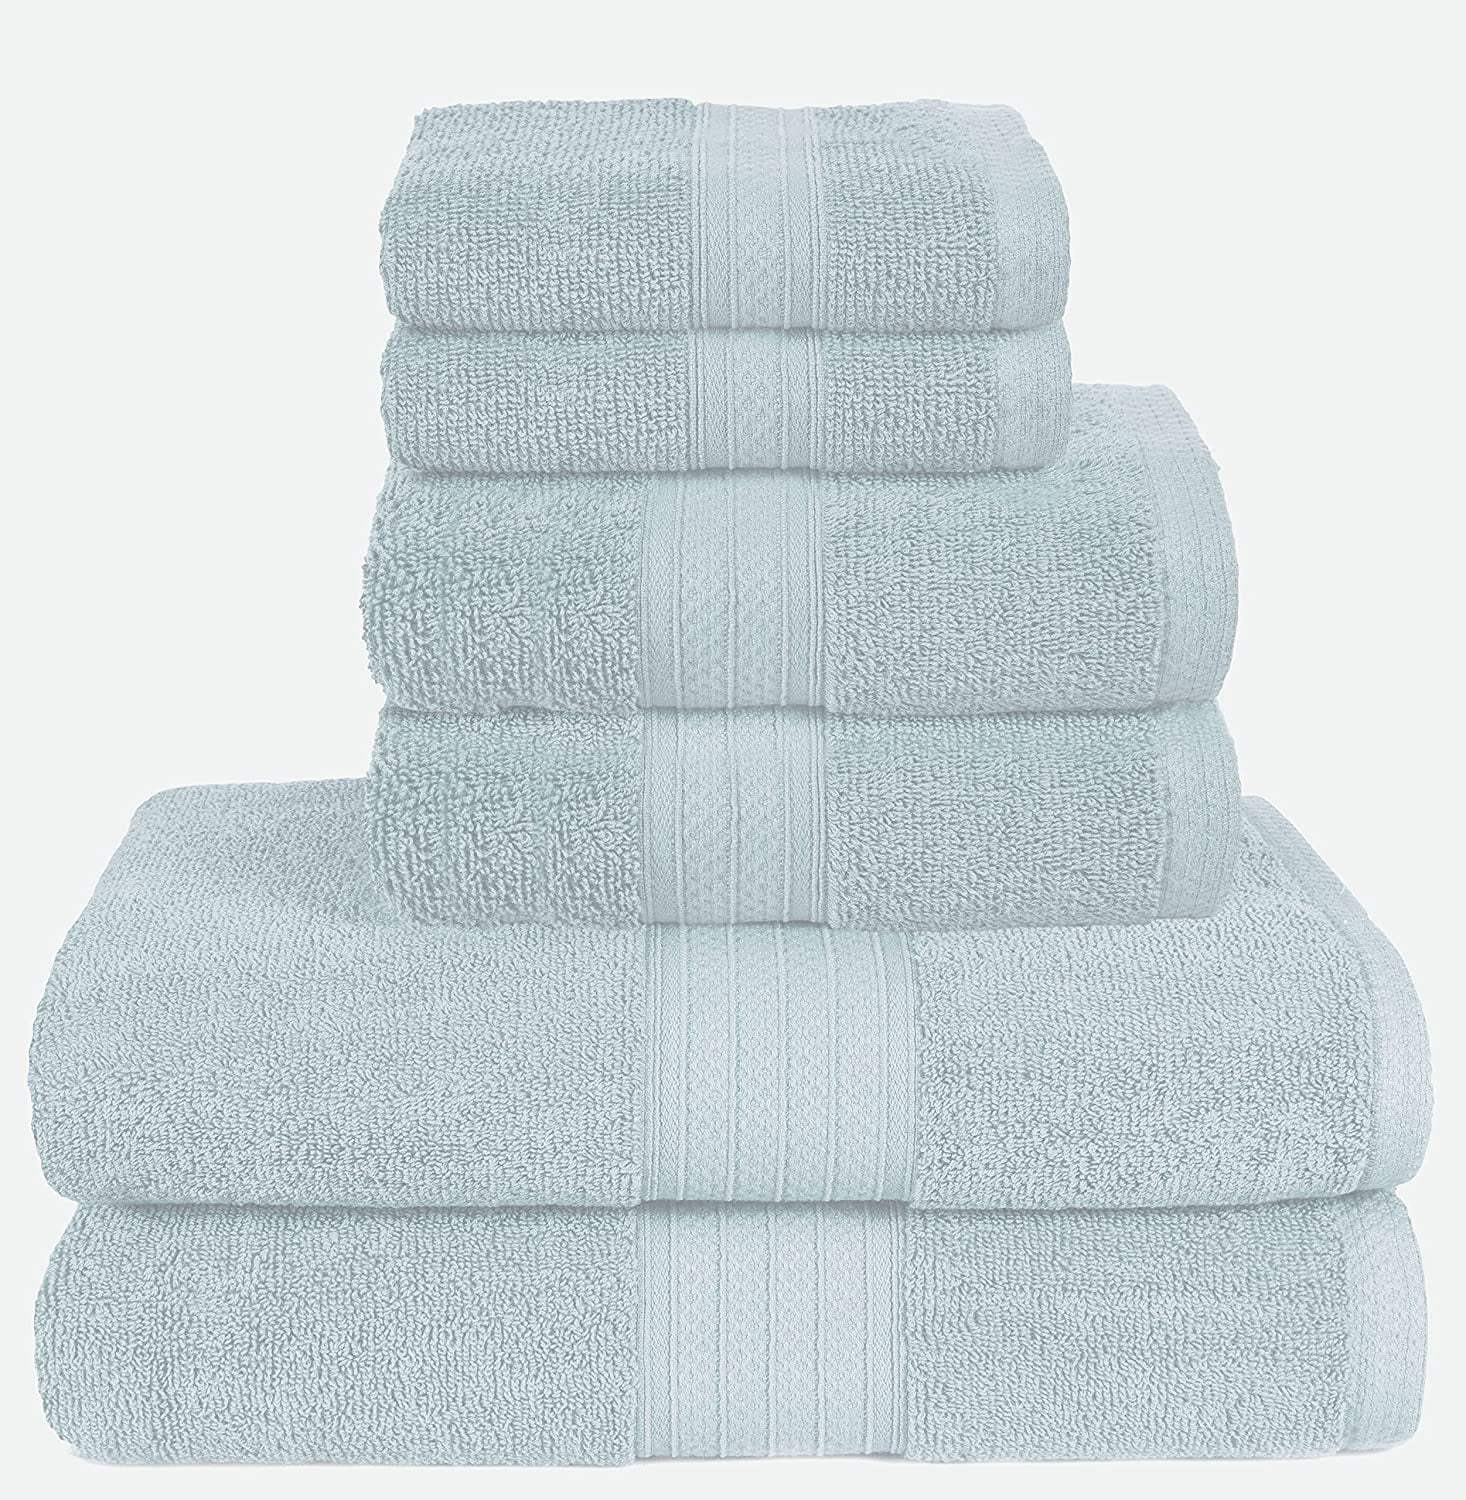 Details about   6 Pack Towel Set Luxury 100% Cotton Washcloth 12" x 12" in Wholesale 